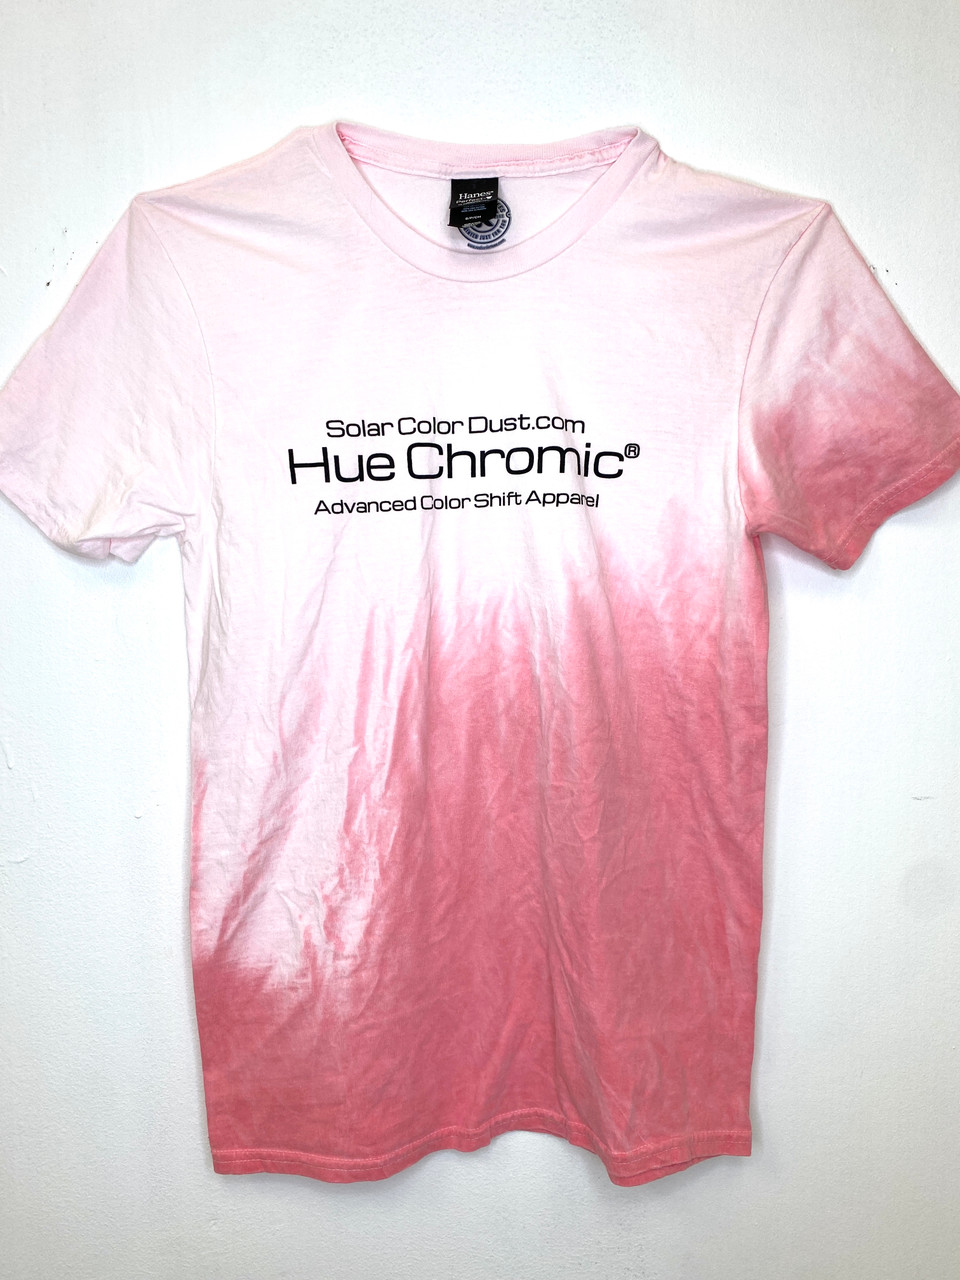 Hue Chromic® Fabric Dye - Red to Colorless